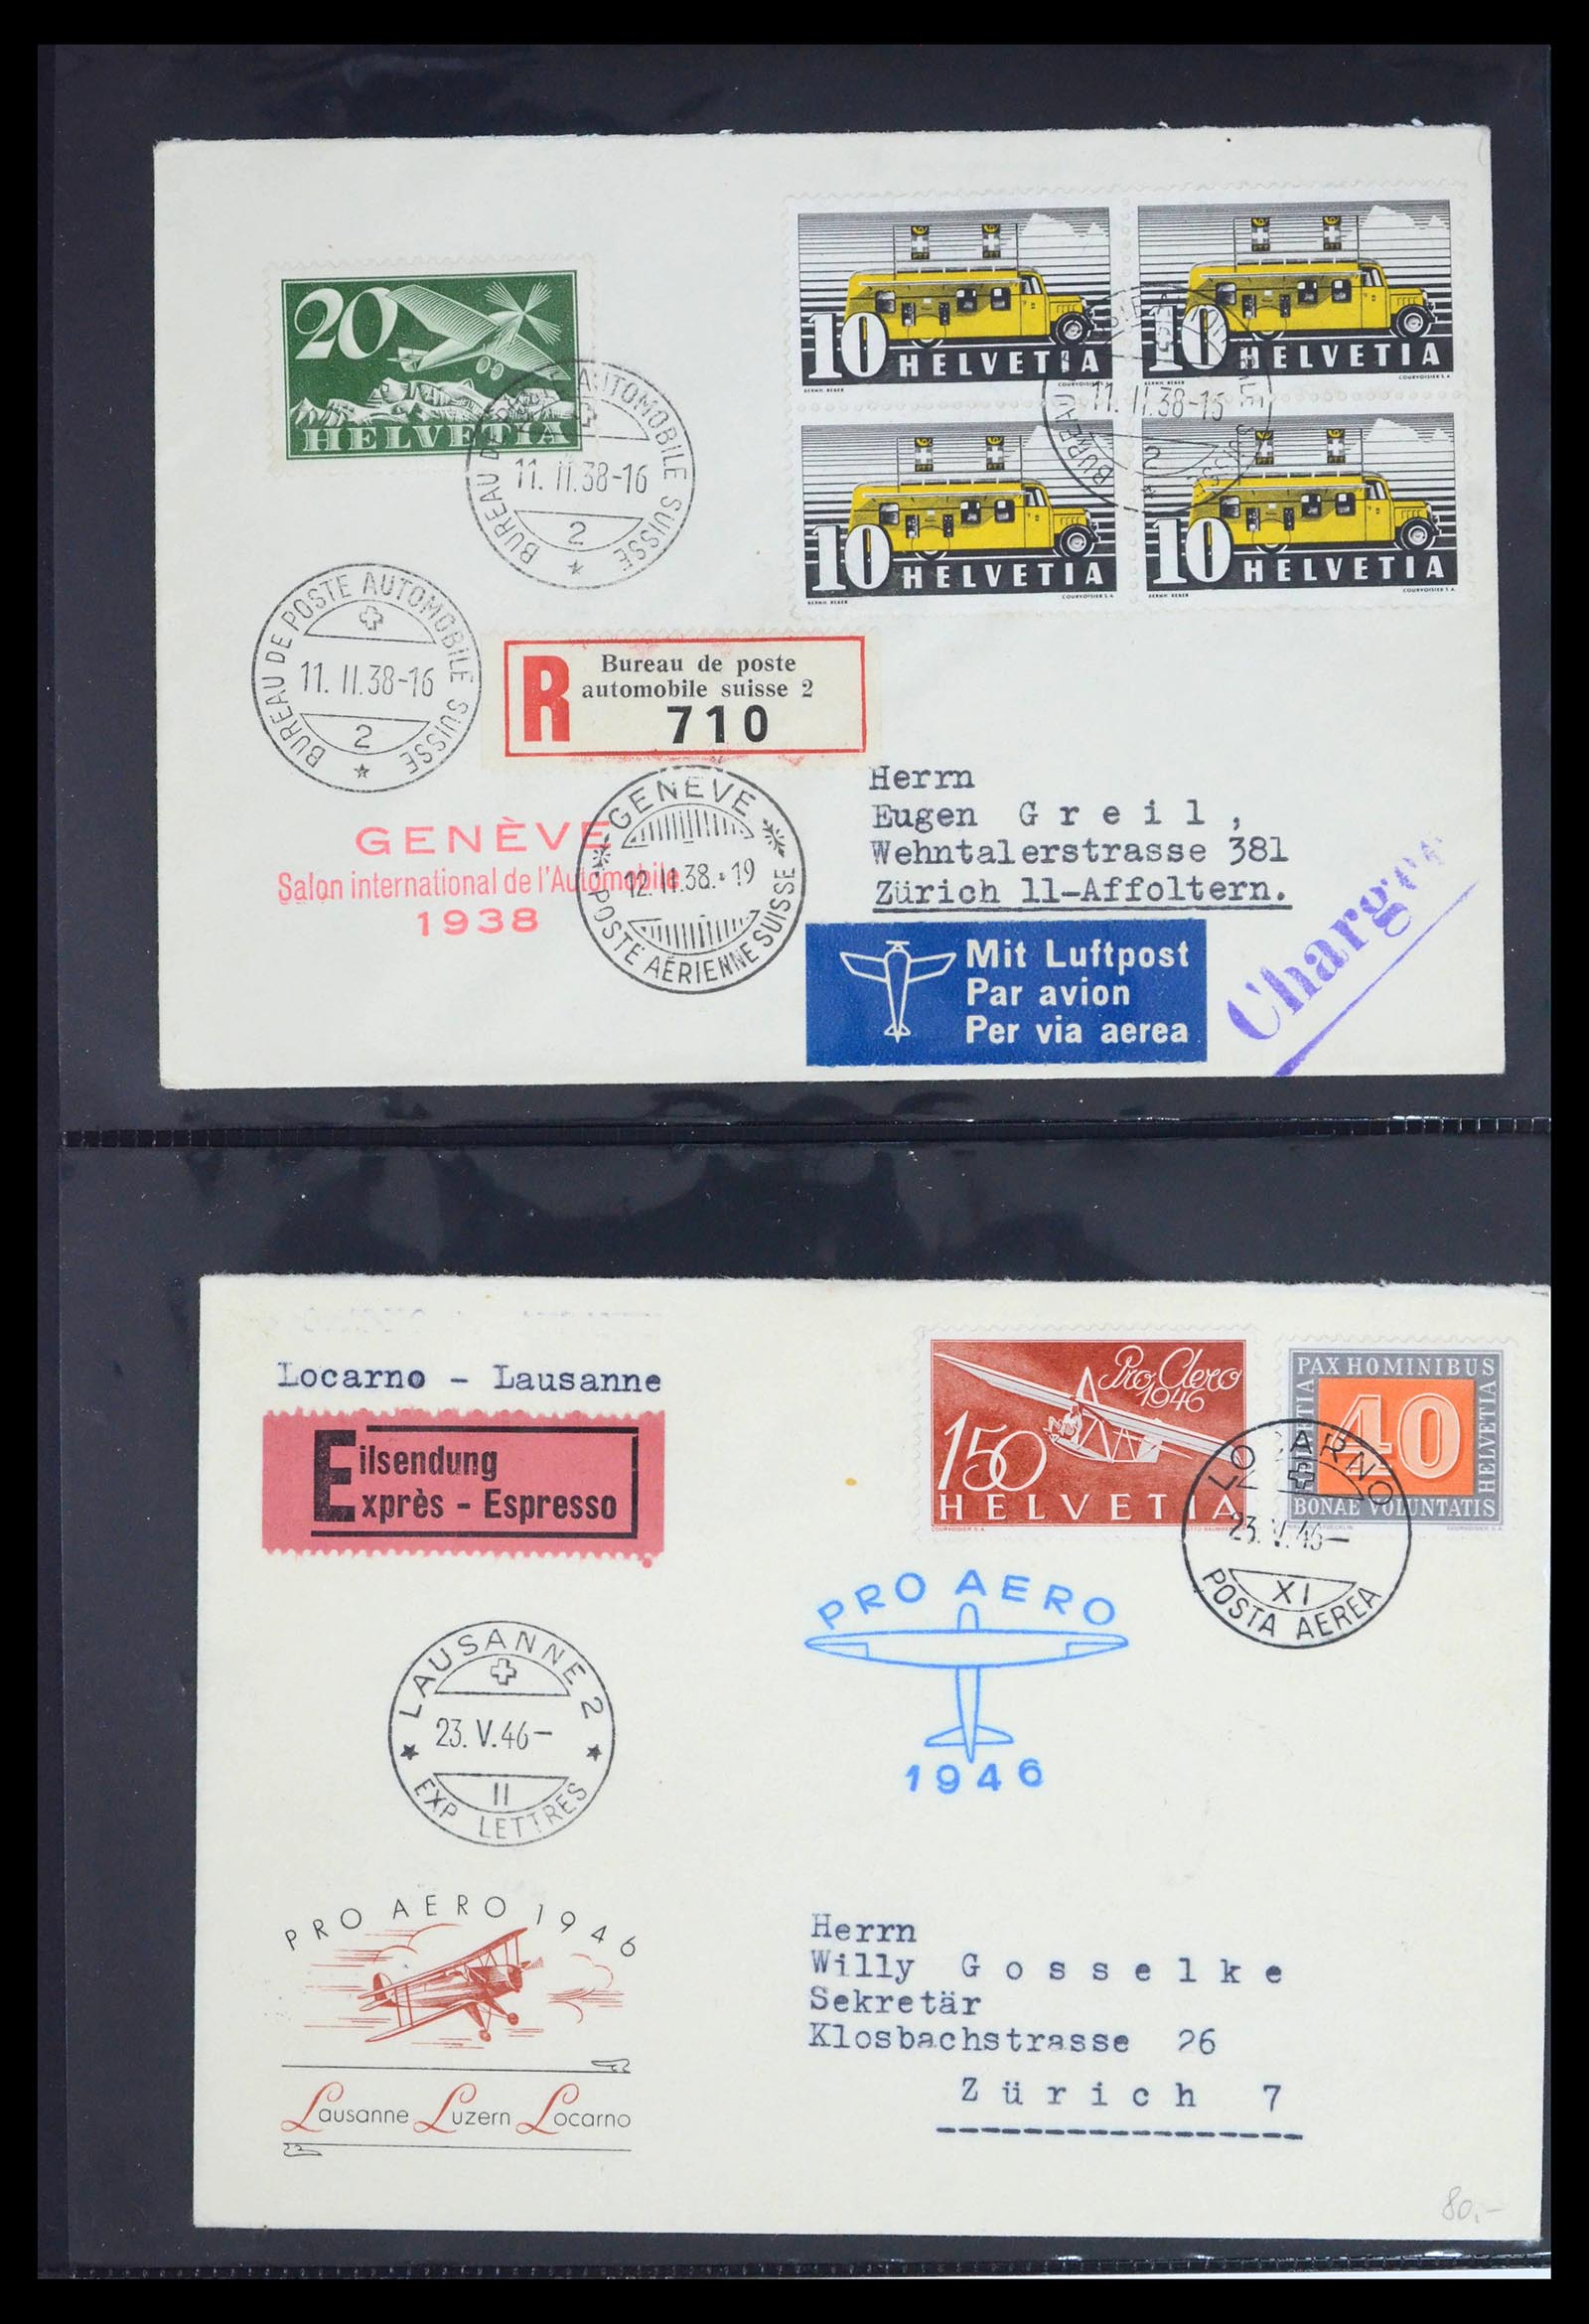 39533 0011 - Stamp collection 39533 Zwitserland airmail covers 1925-1960.